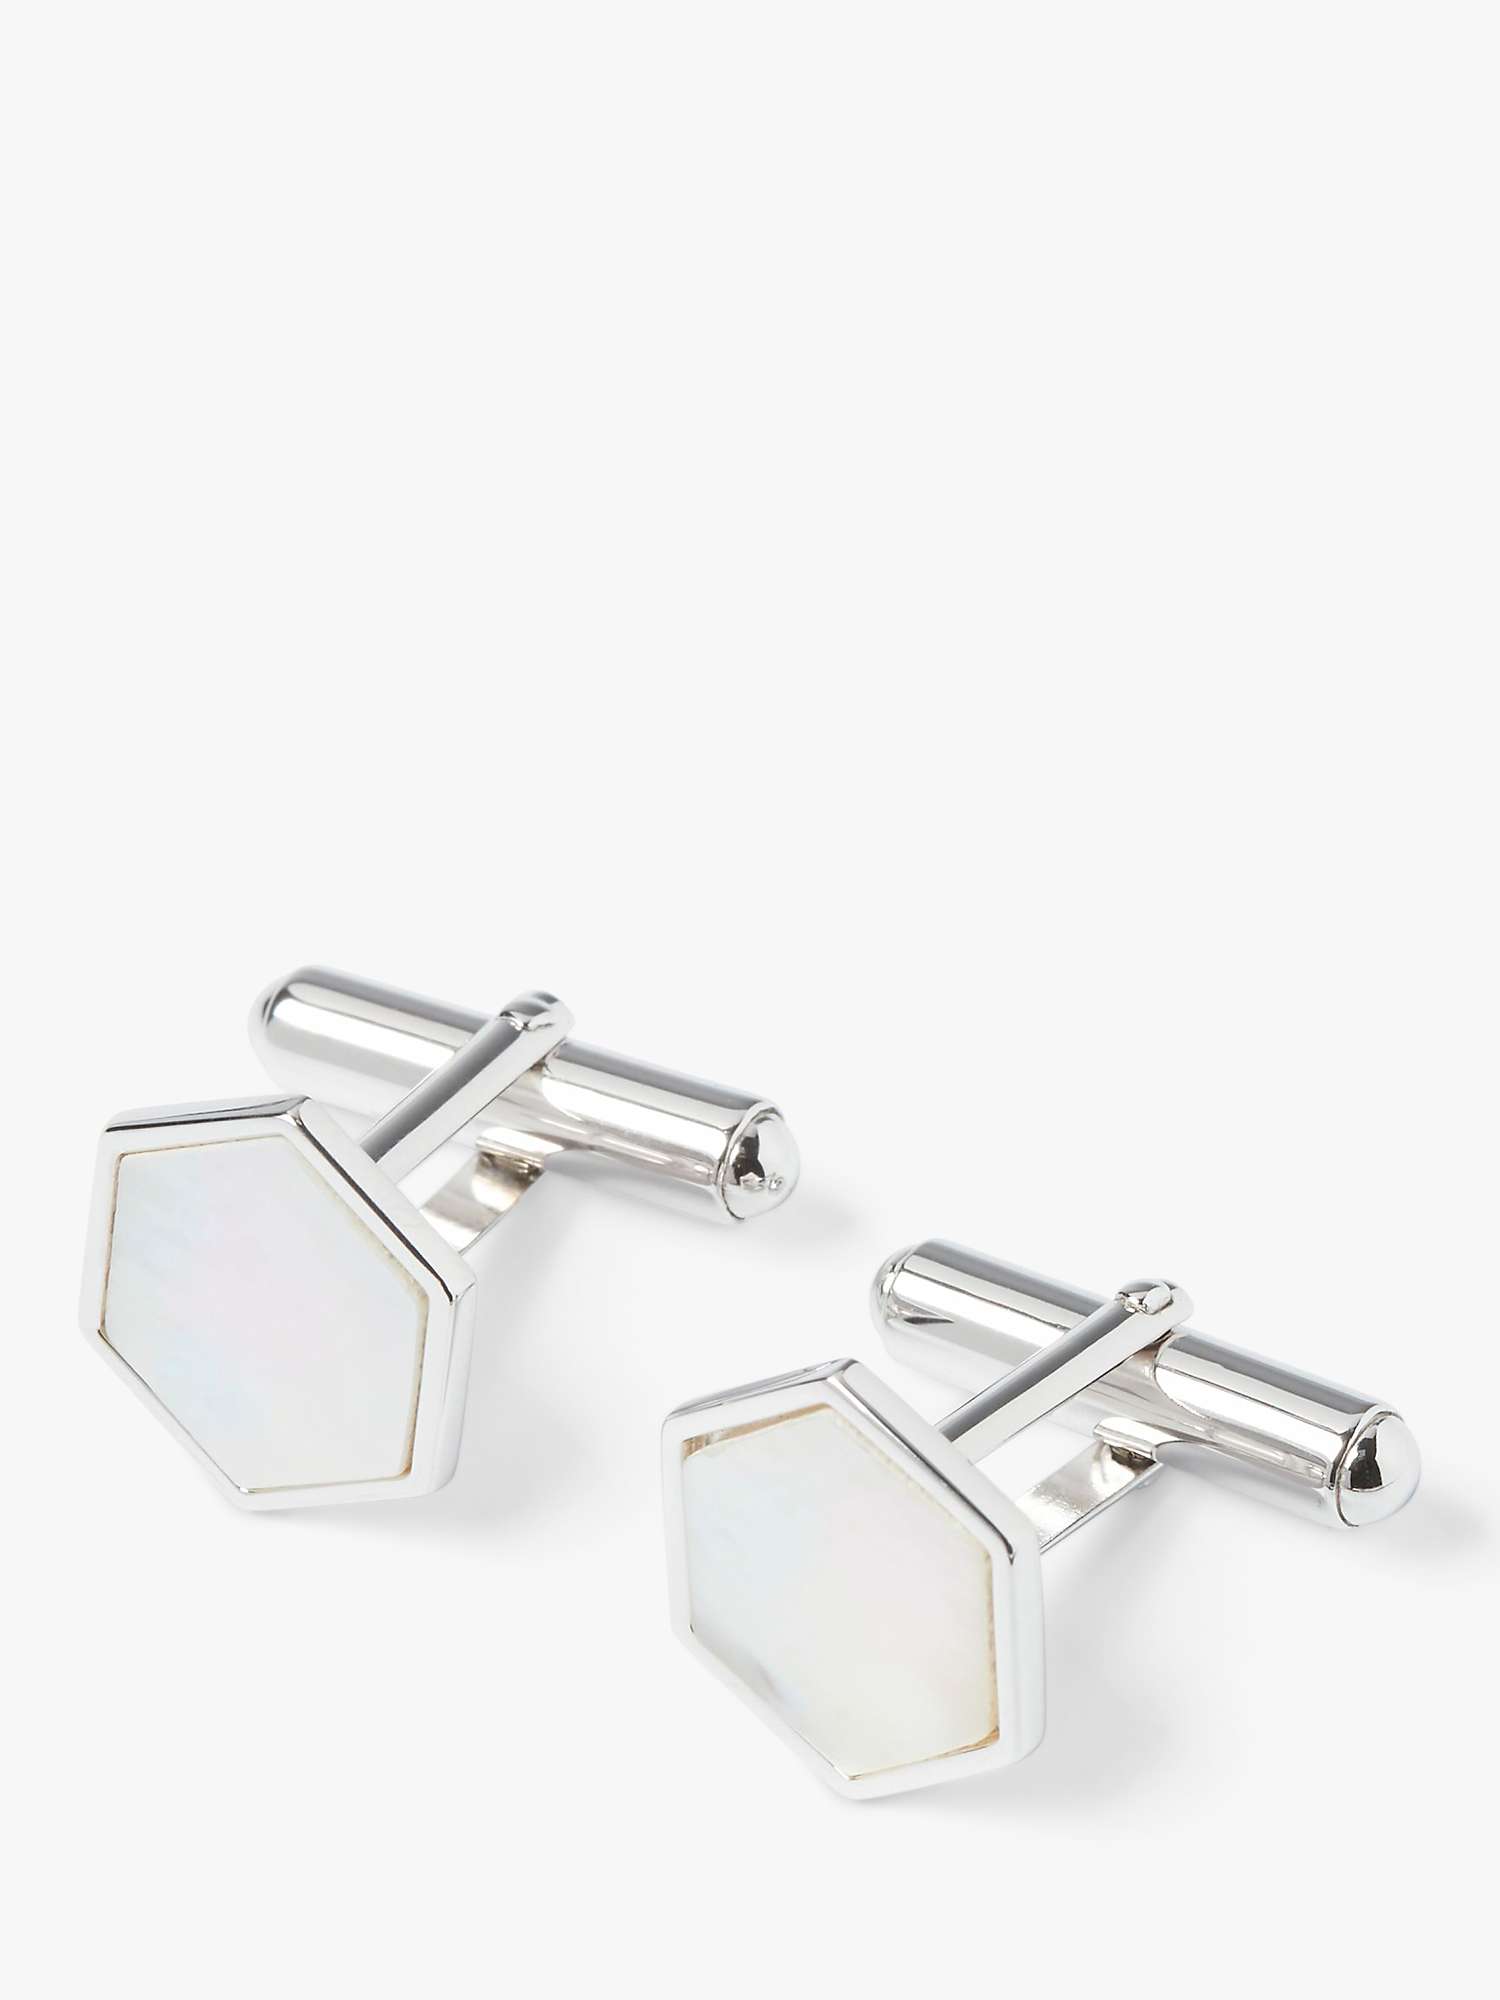 Buy Simon Carter Sterling Silver Mother of Pearl Hexagon Cufflinks, Silver Online at johnlewis.com